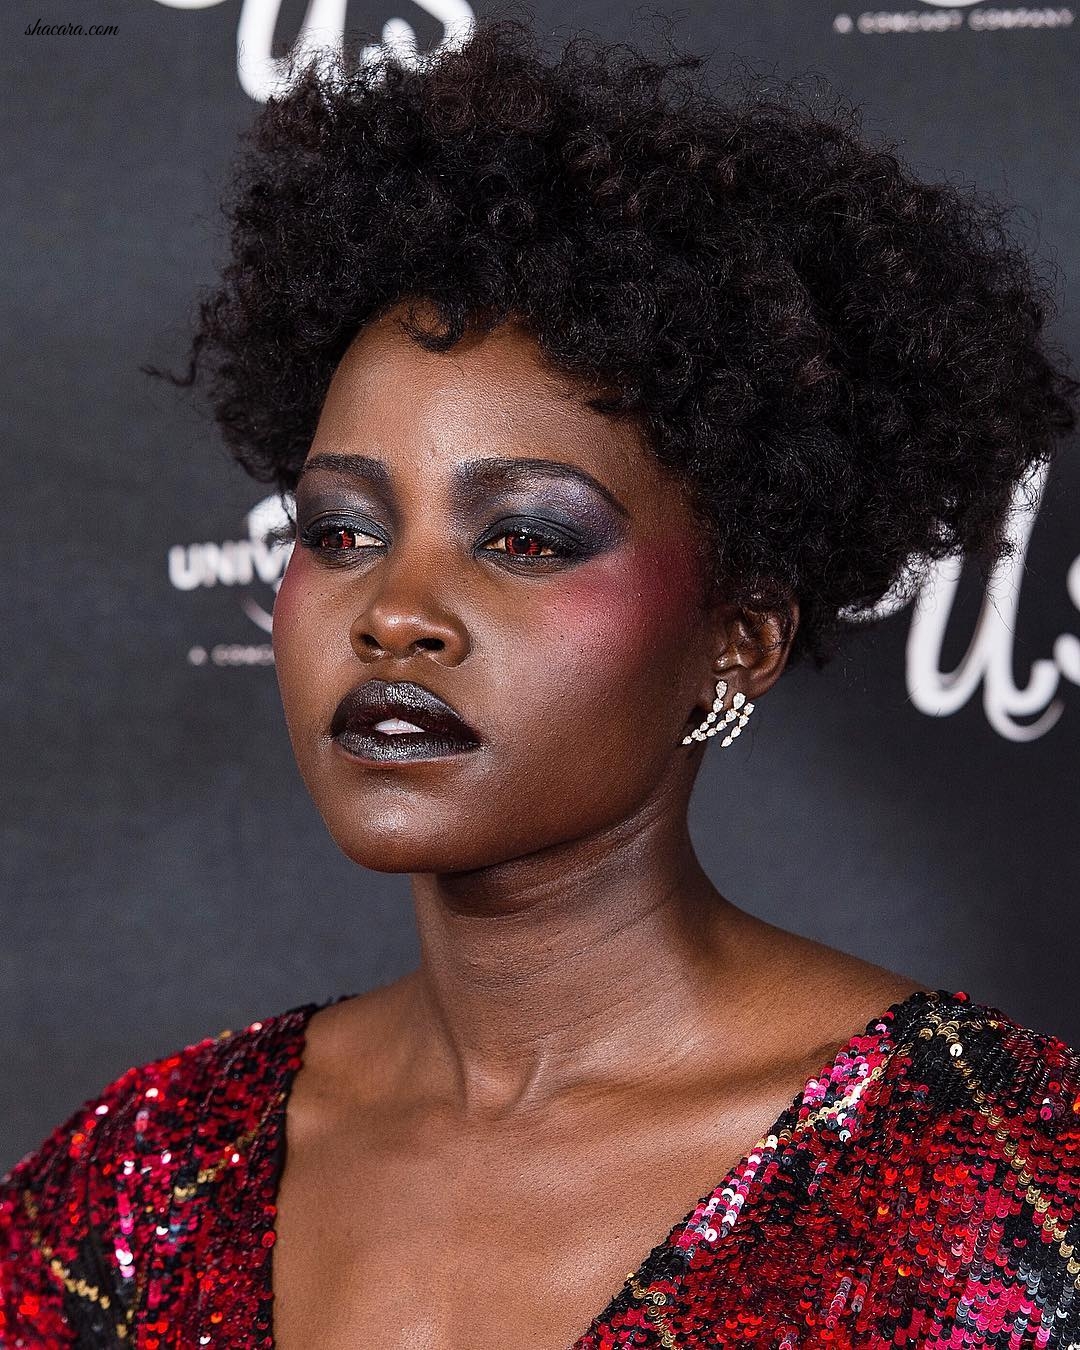 Lupita Nyong’o Looks Hauntingly Gorgeous As She Attends The London Screening Of ‘Us’